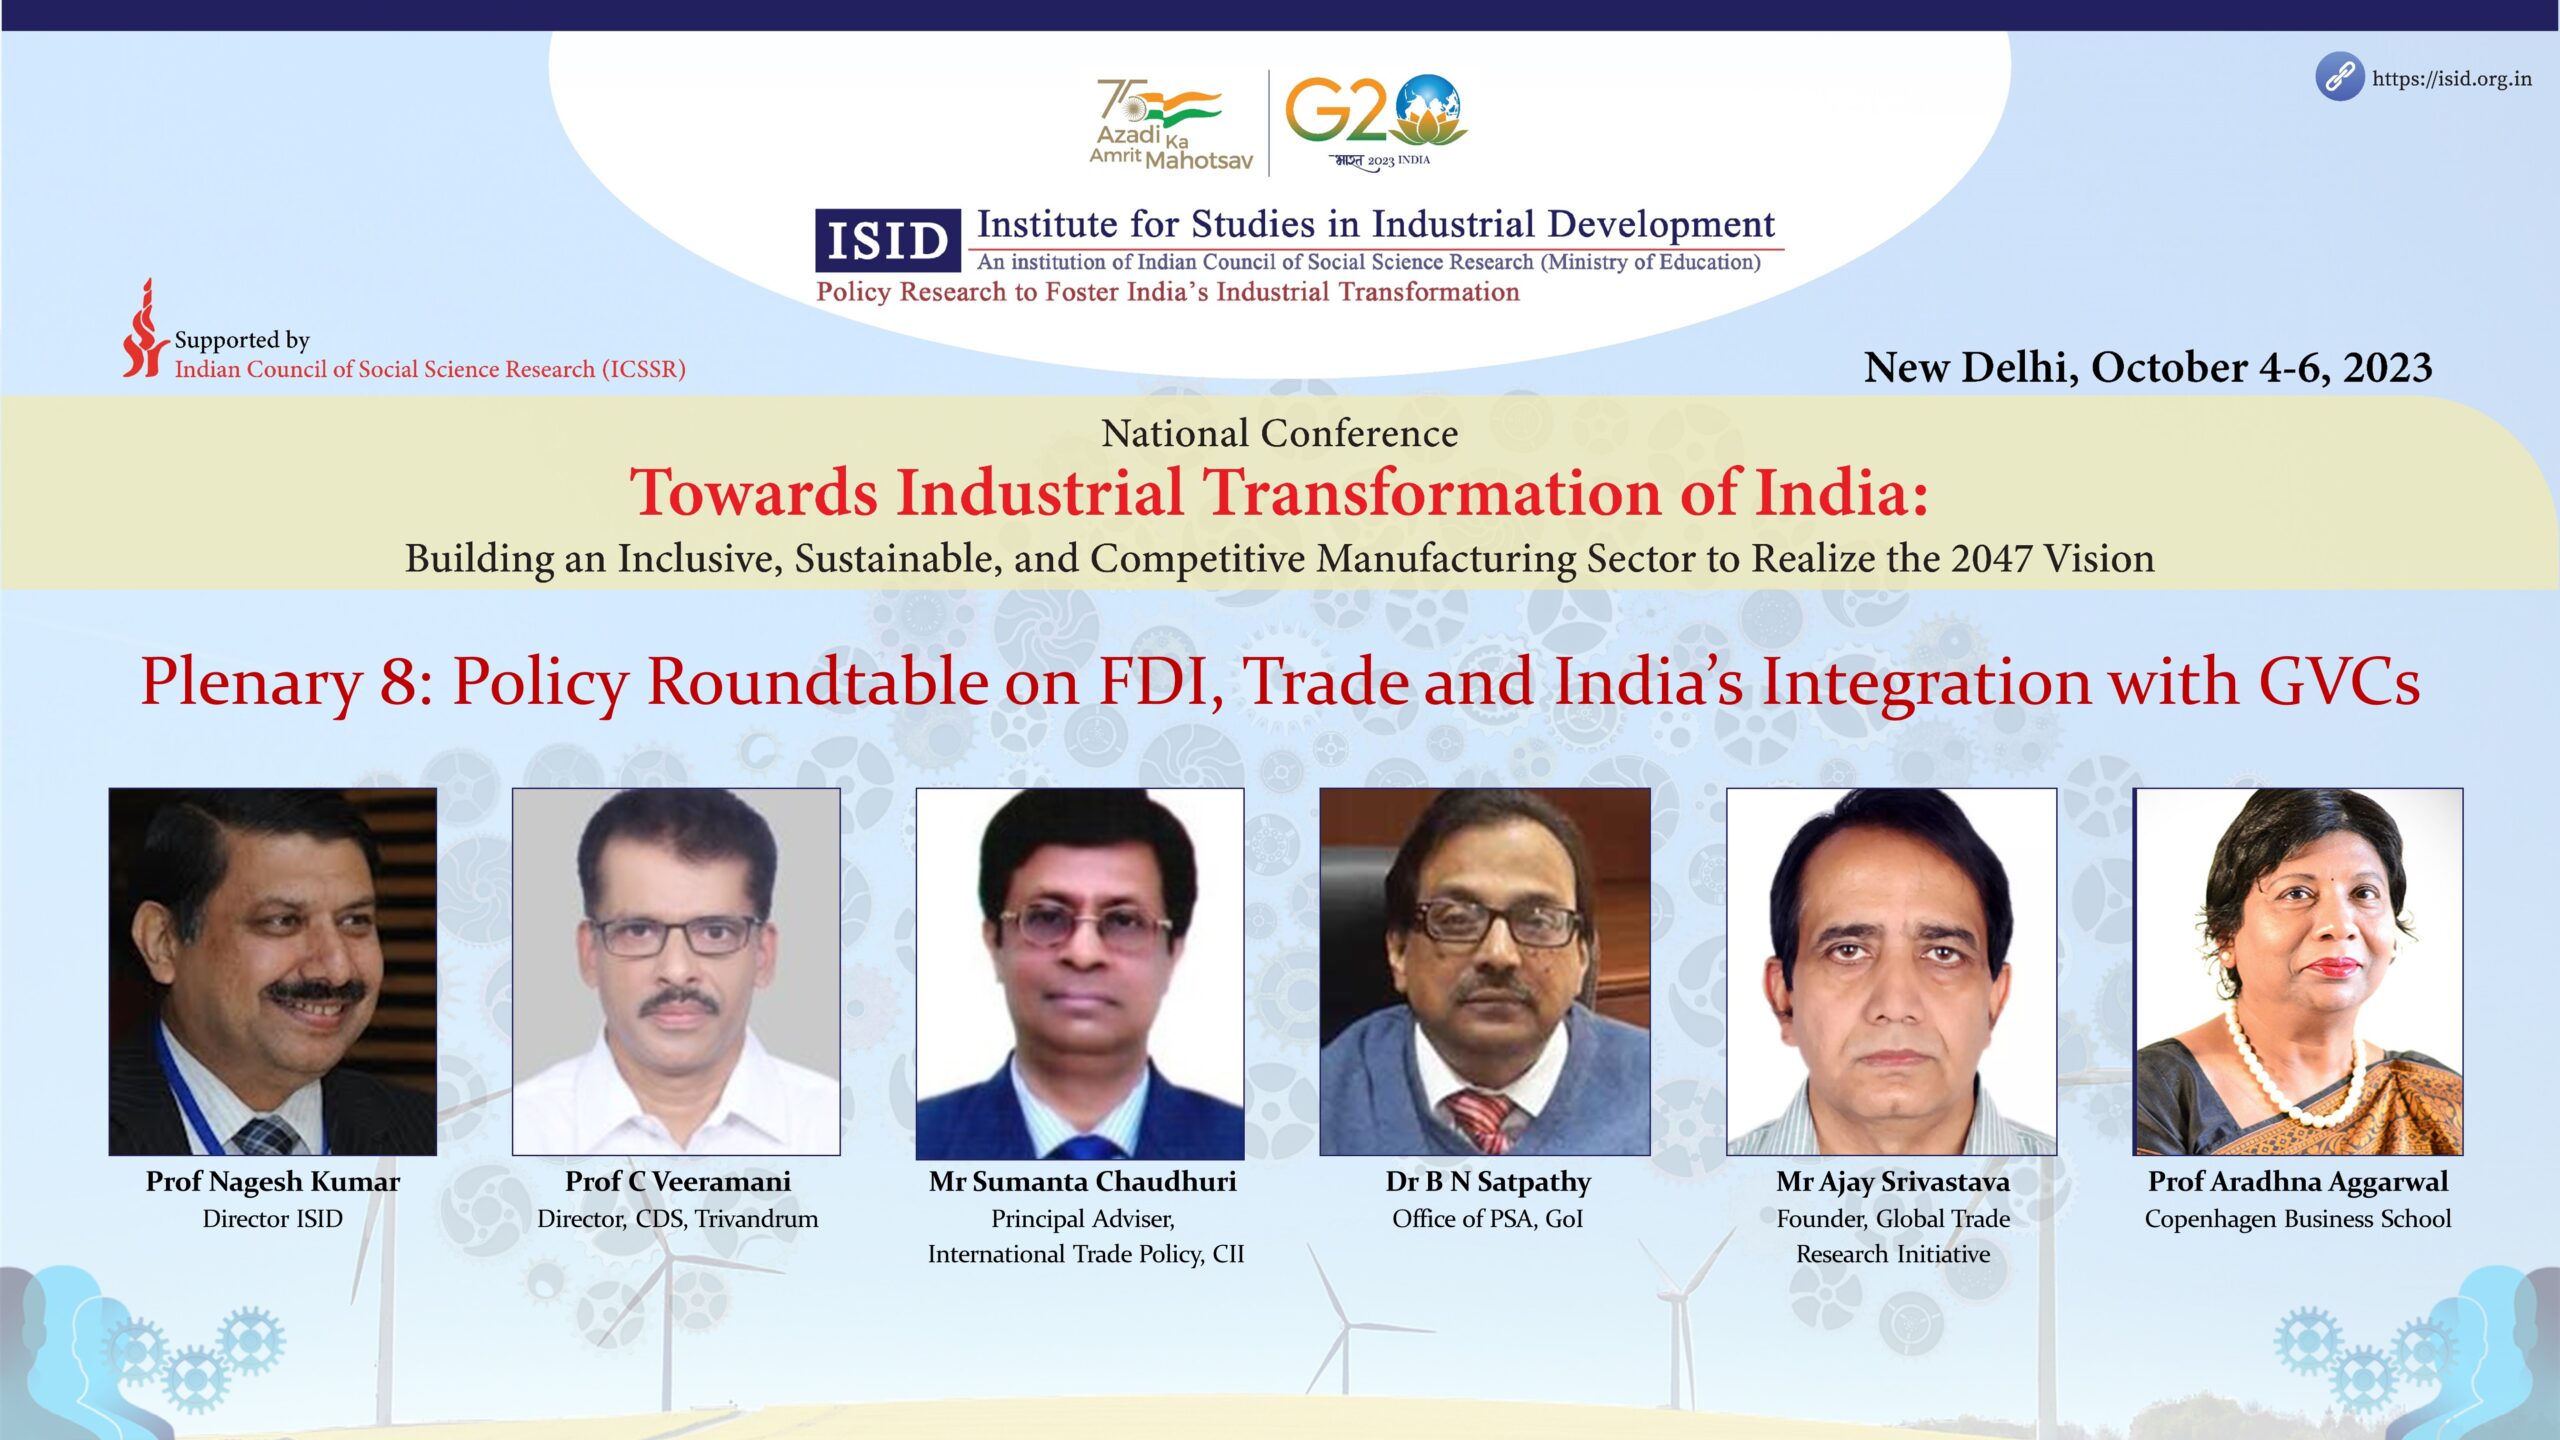 Policy Roundtable on FDI, Trade and India’s Integration with GVCs